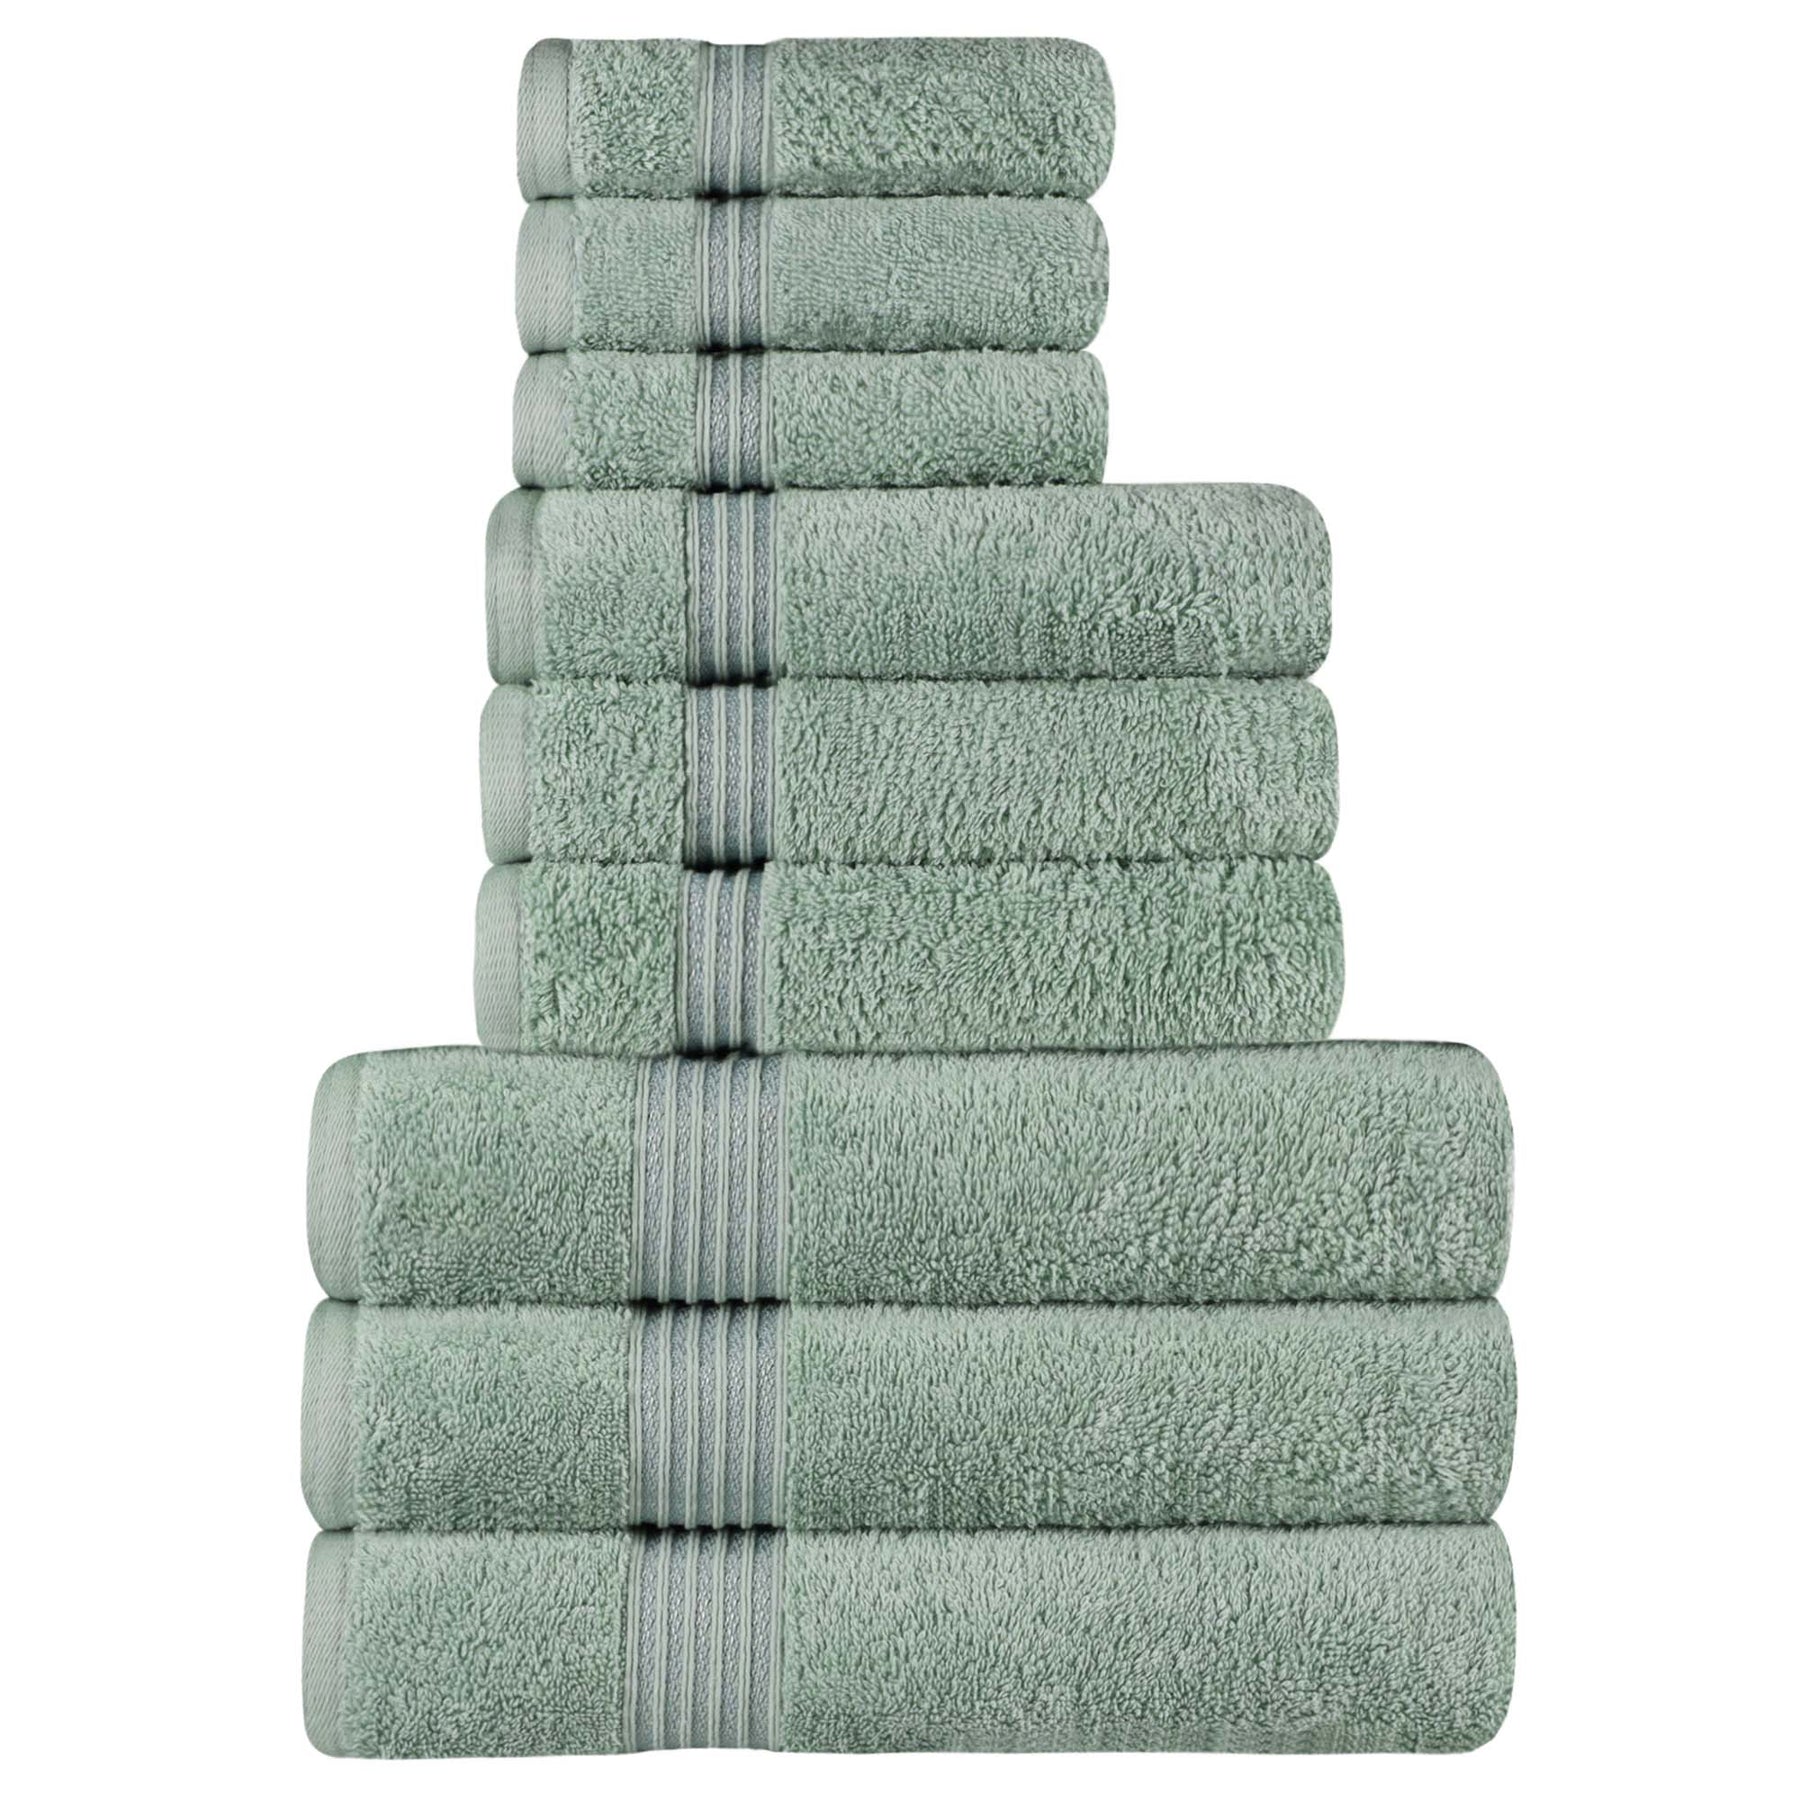 Egyptian Cotton Highly Absorbent Solid 9 Piece Ultra Soft Towel Set - Sage